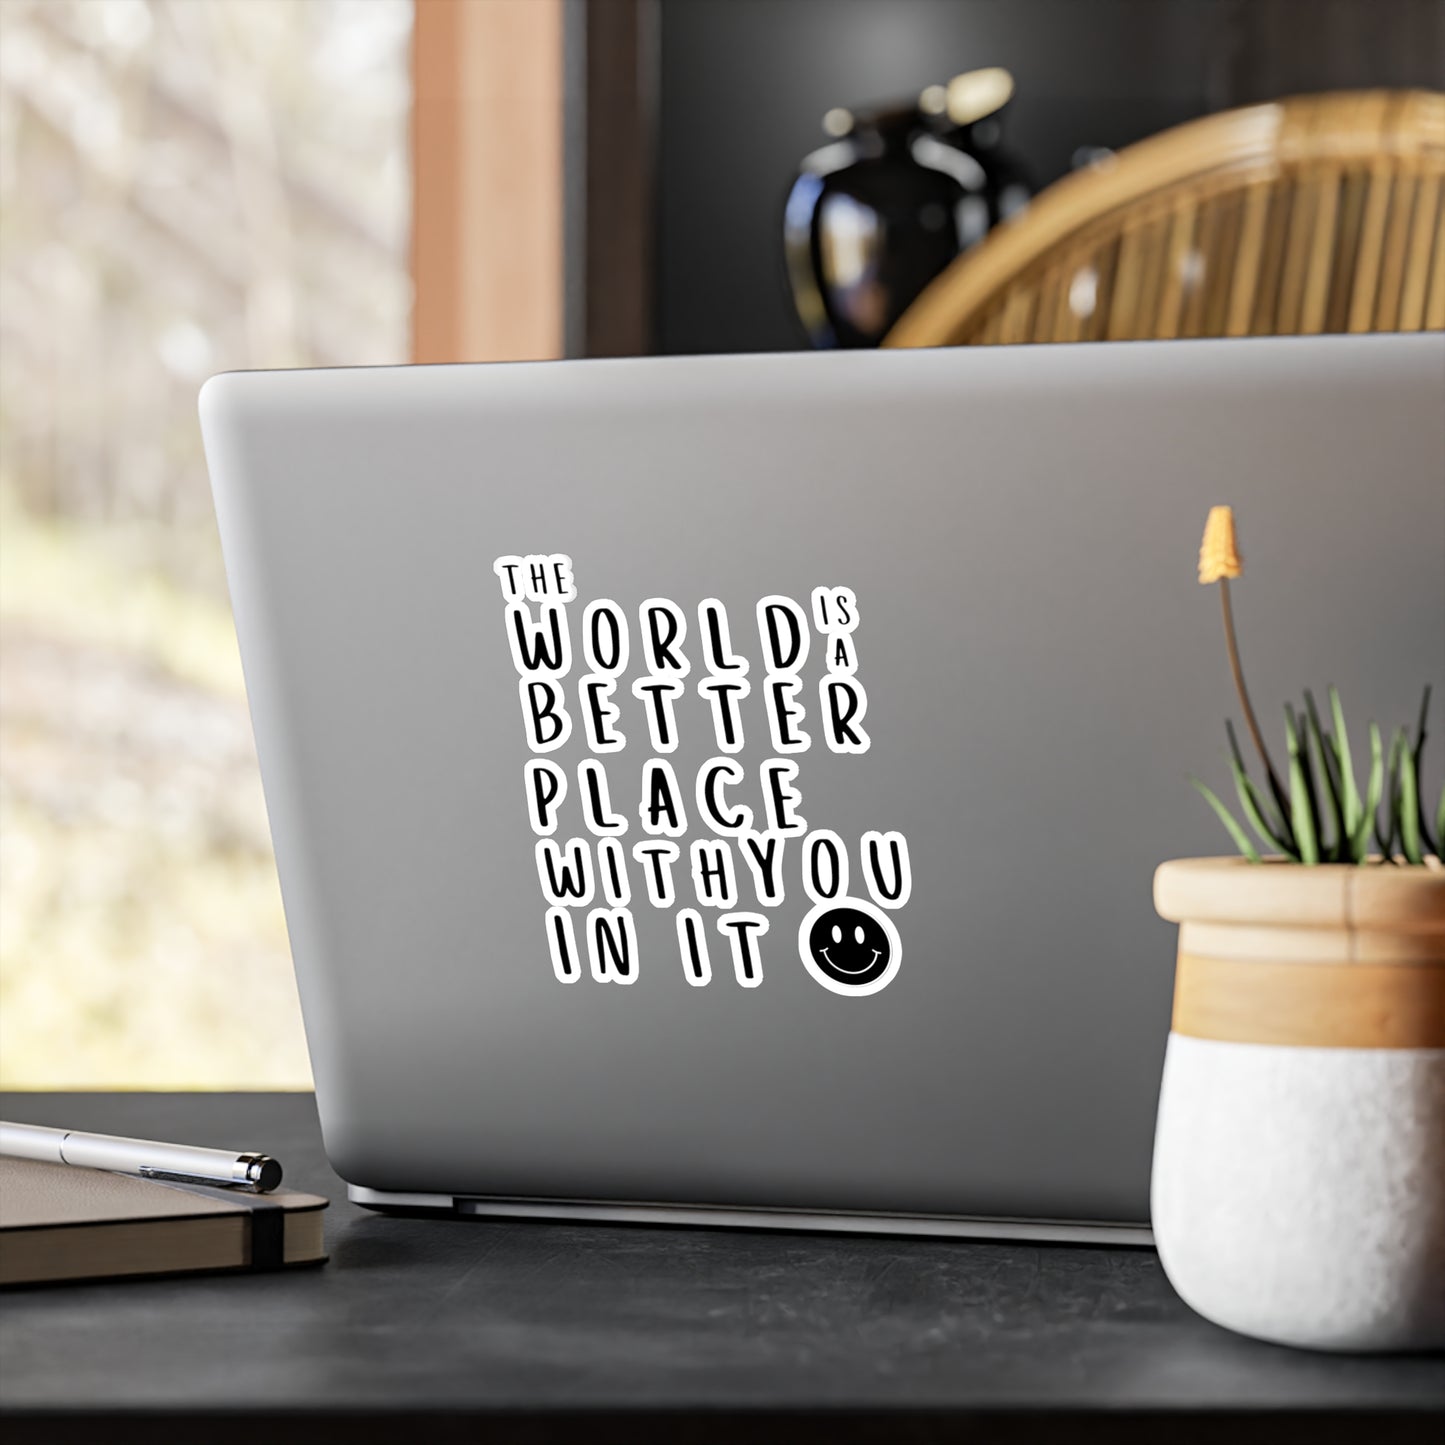 Smile: The World is a Better Place With You Vinyl Decals